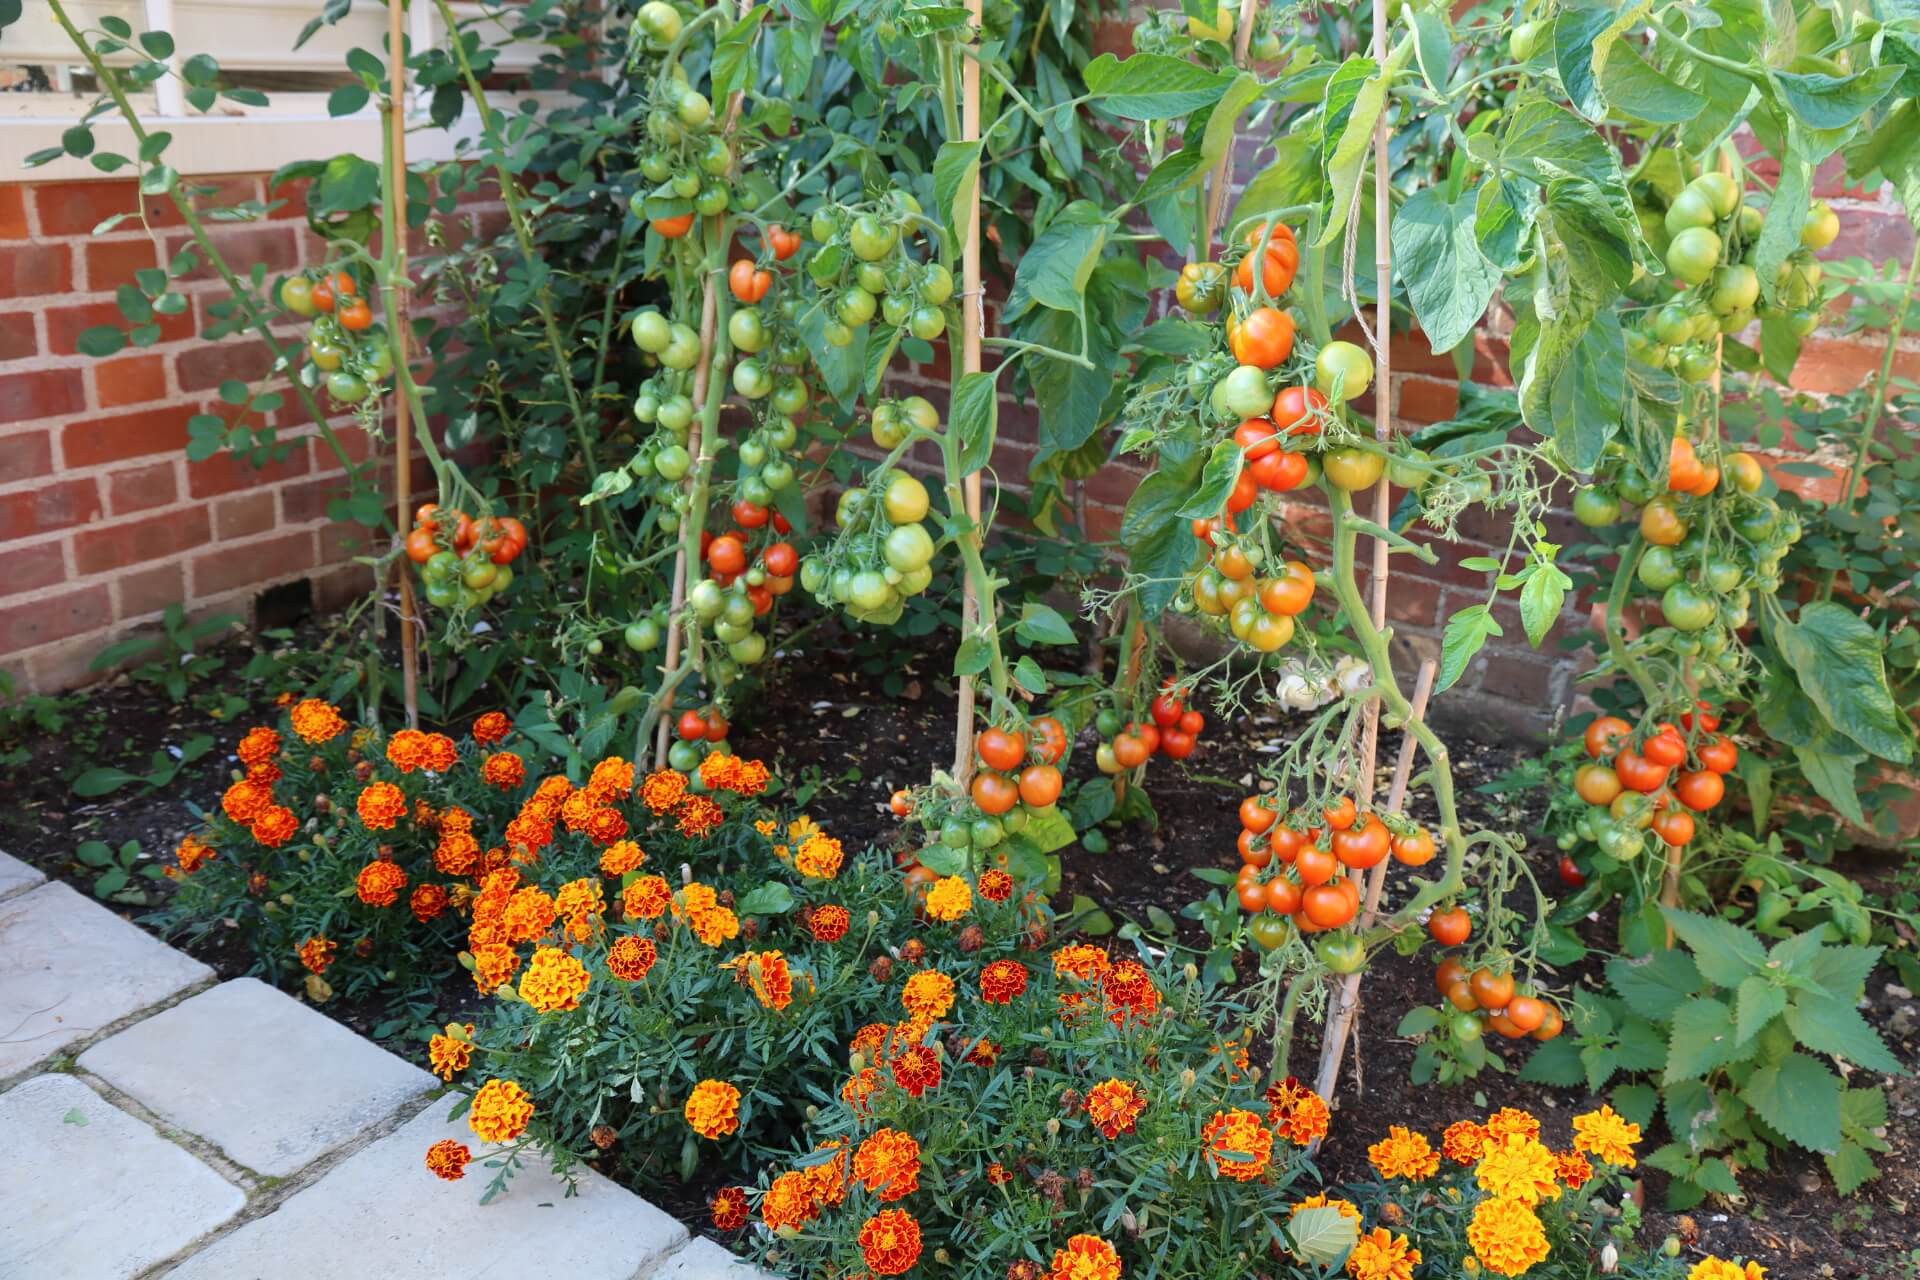 Enjoy Summer-Long Tasty Tomatoes with Ailsa Craig DTM - An Indeterminate Tomato Variety for Balconies and Containers.